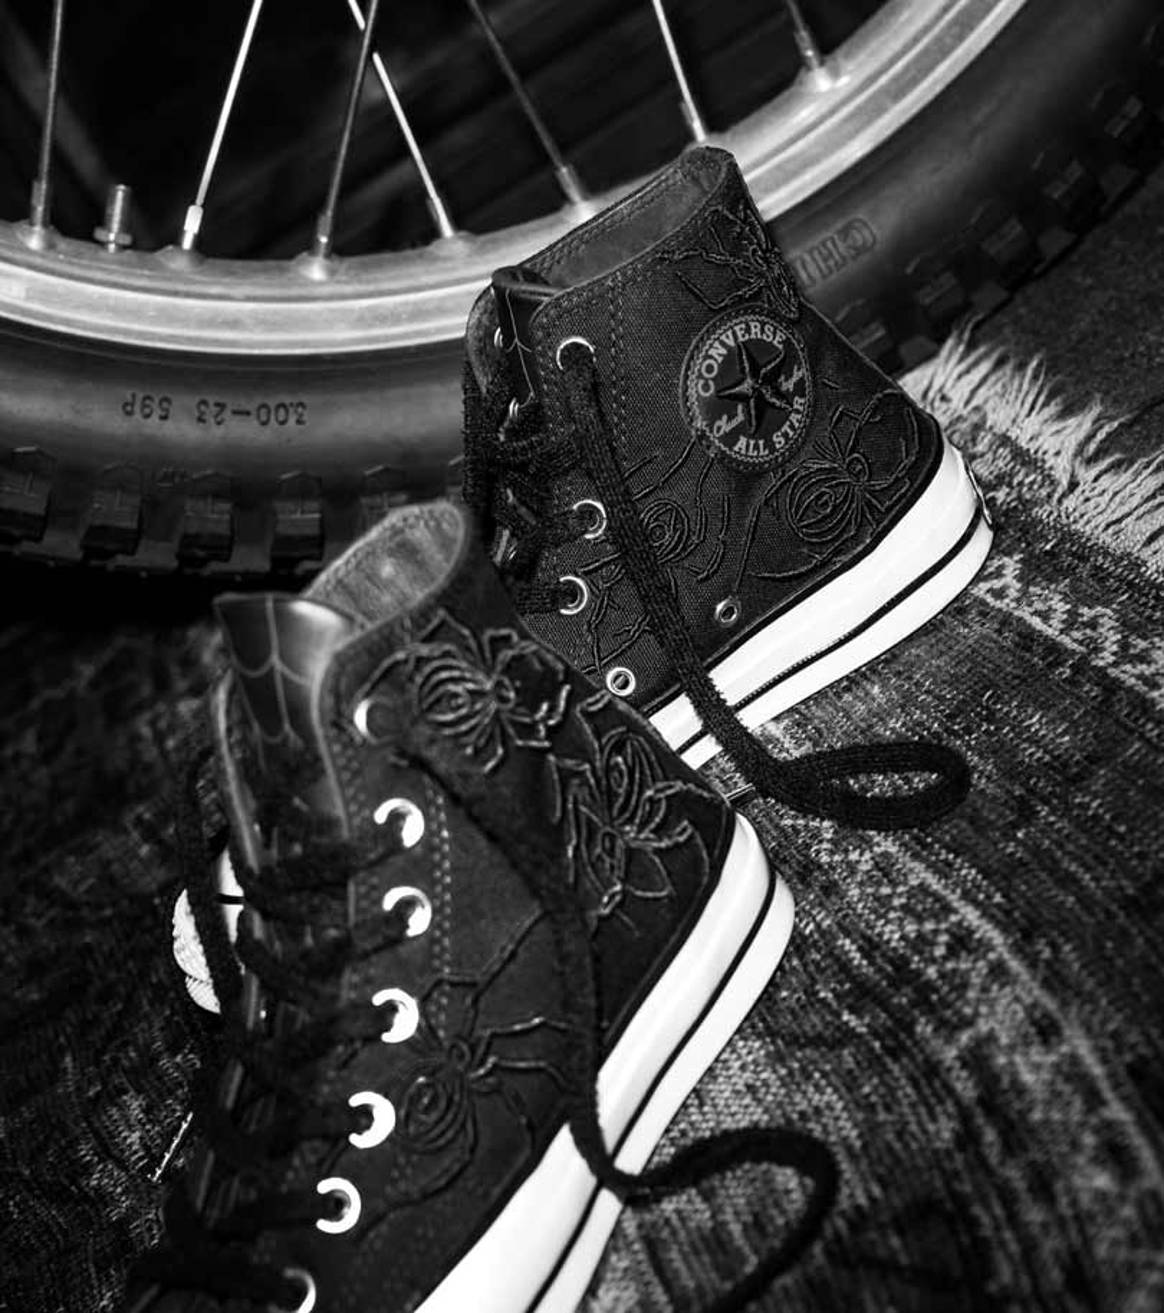 Converse x Dr. Woo launch exclusive collection